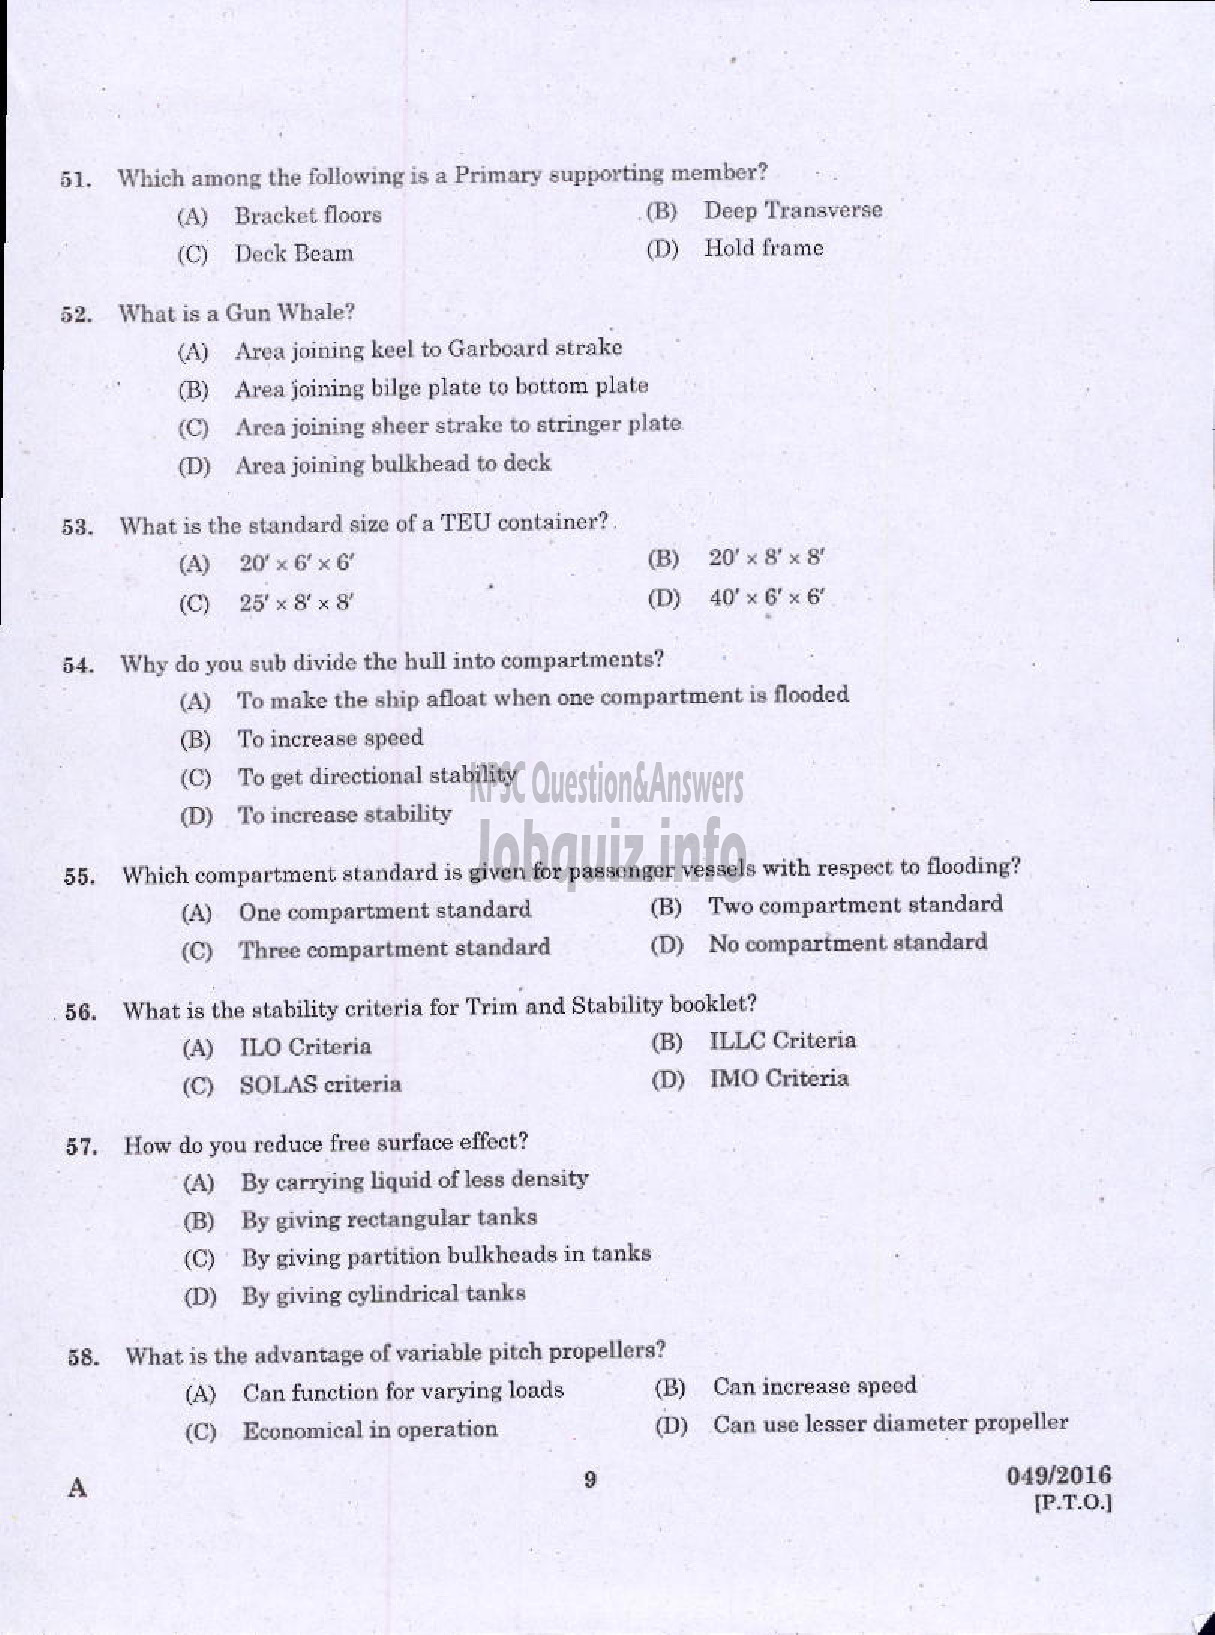 Kerala PSC Question Paper - WORKS MANAGER STATE WATER TRANSPORT-7